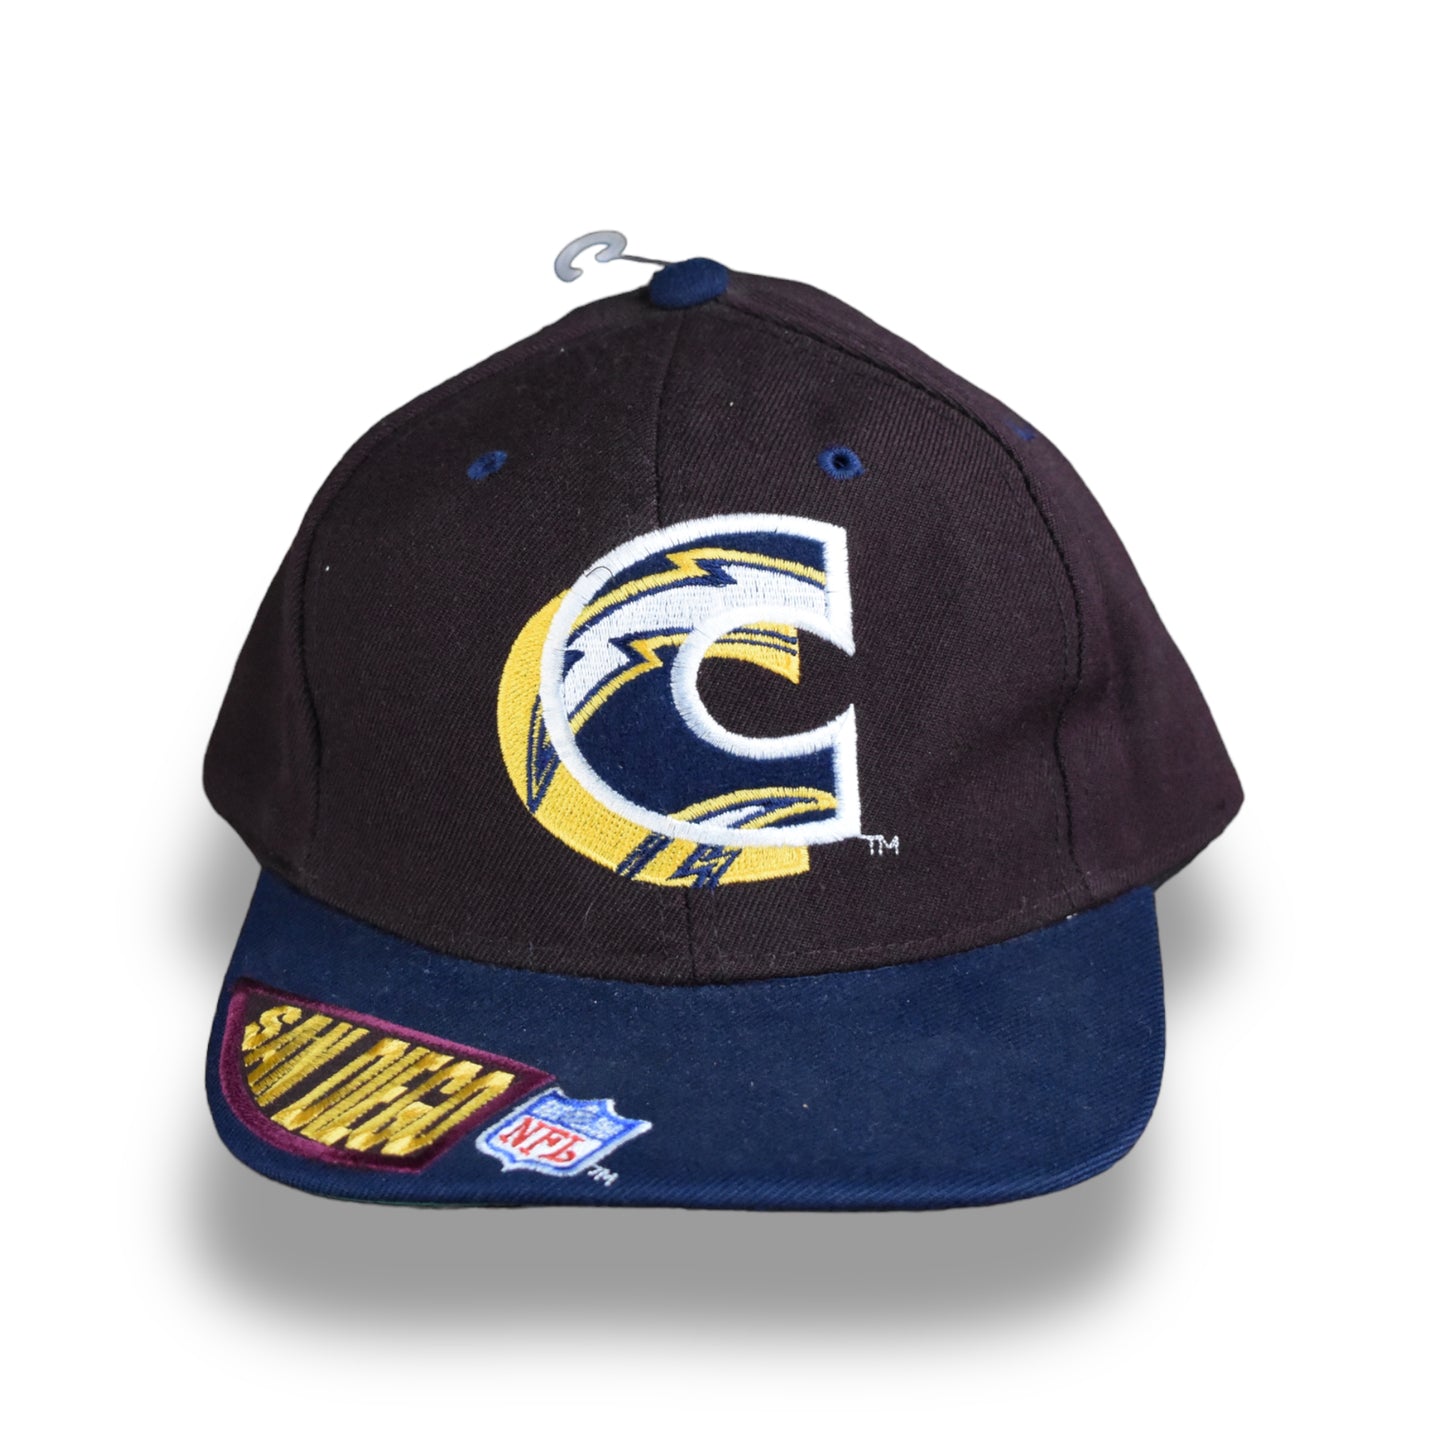 ‘90s San Diego Chargers Hat